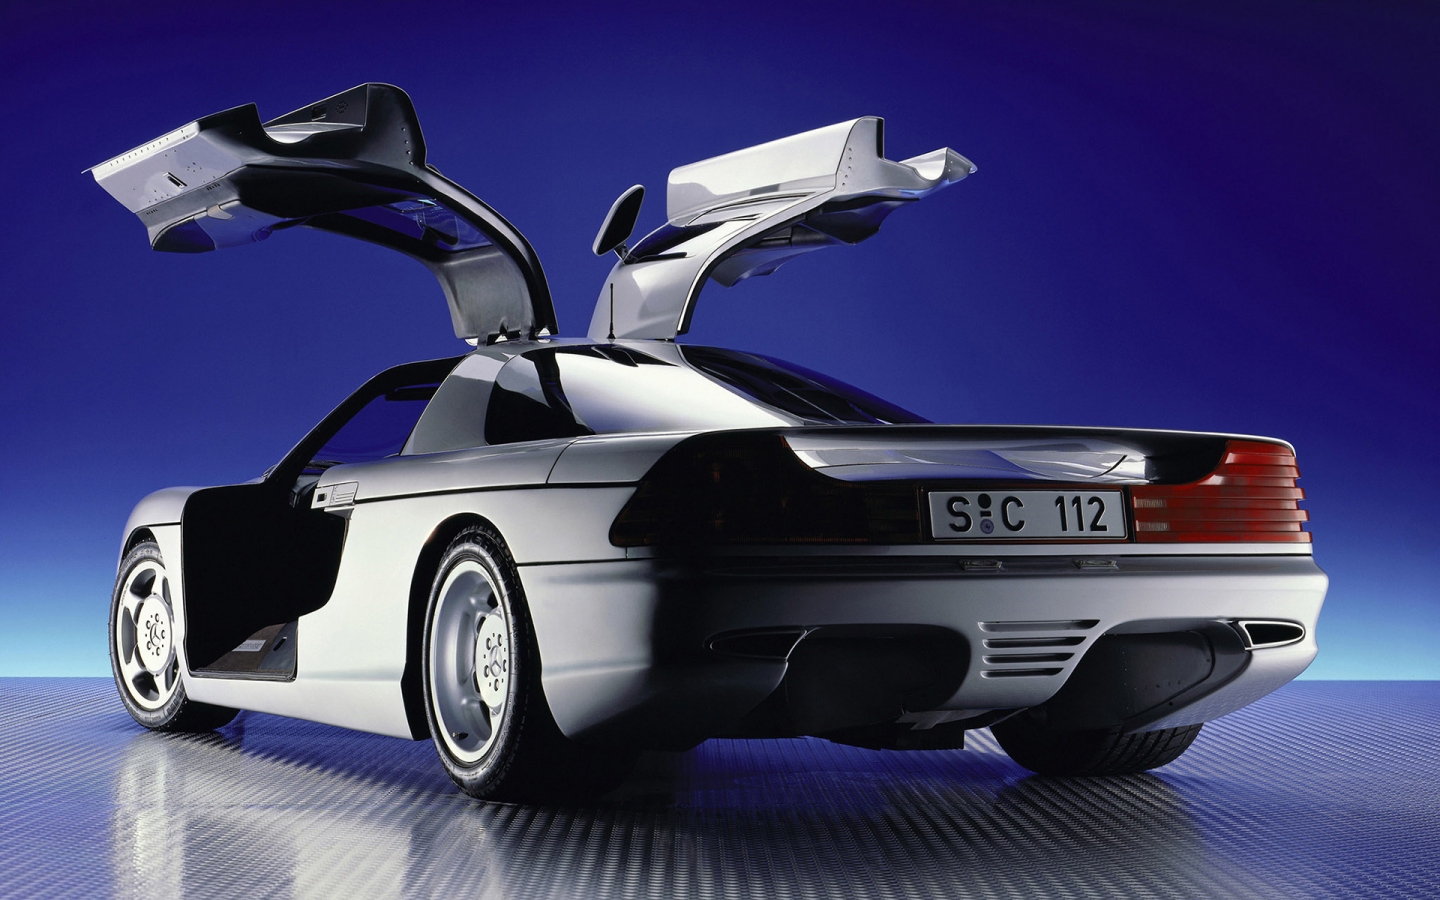 Mercedes C112 Concept 1991 for 1440 x 900 widescreen resolution